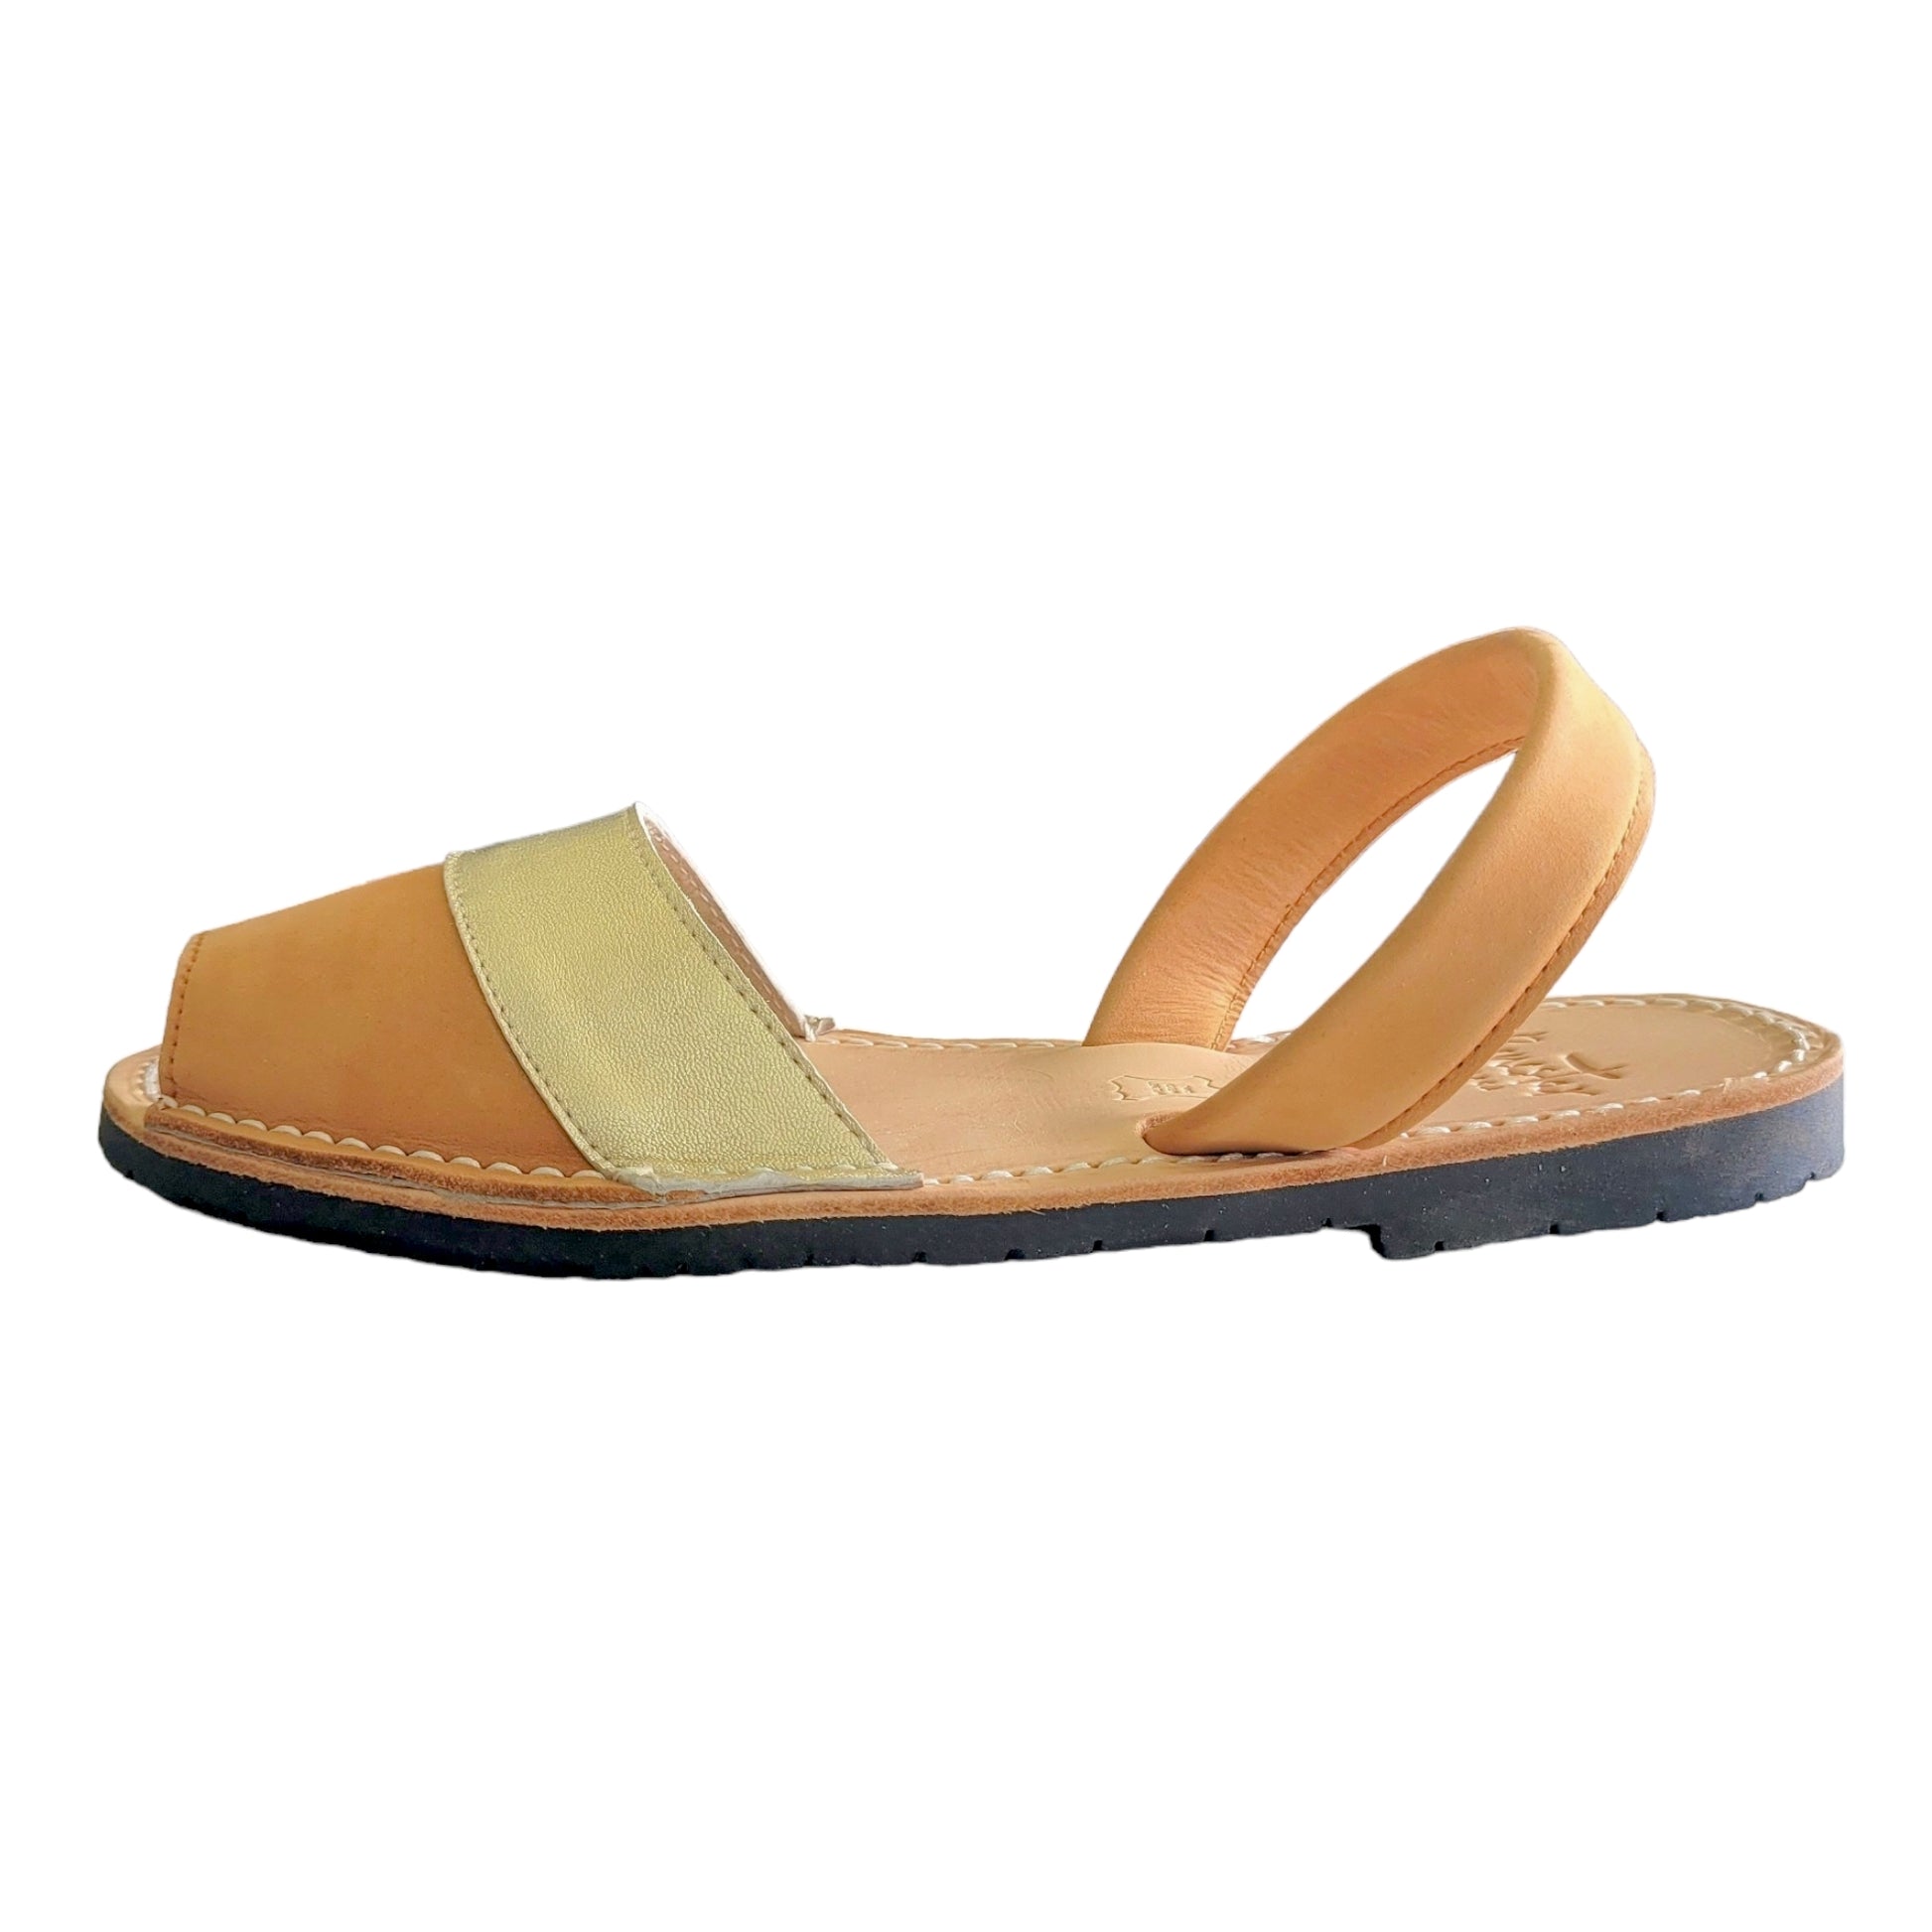 Duo-Gold-Tan-Avarca-Sandals-Sideview